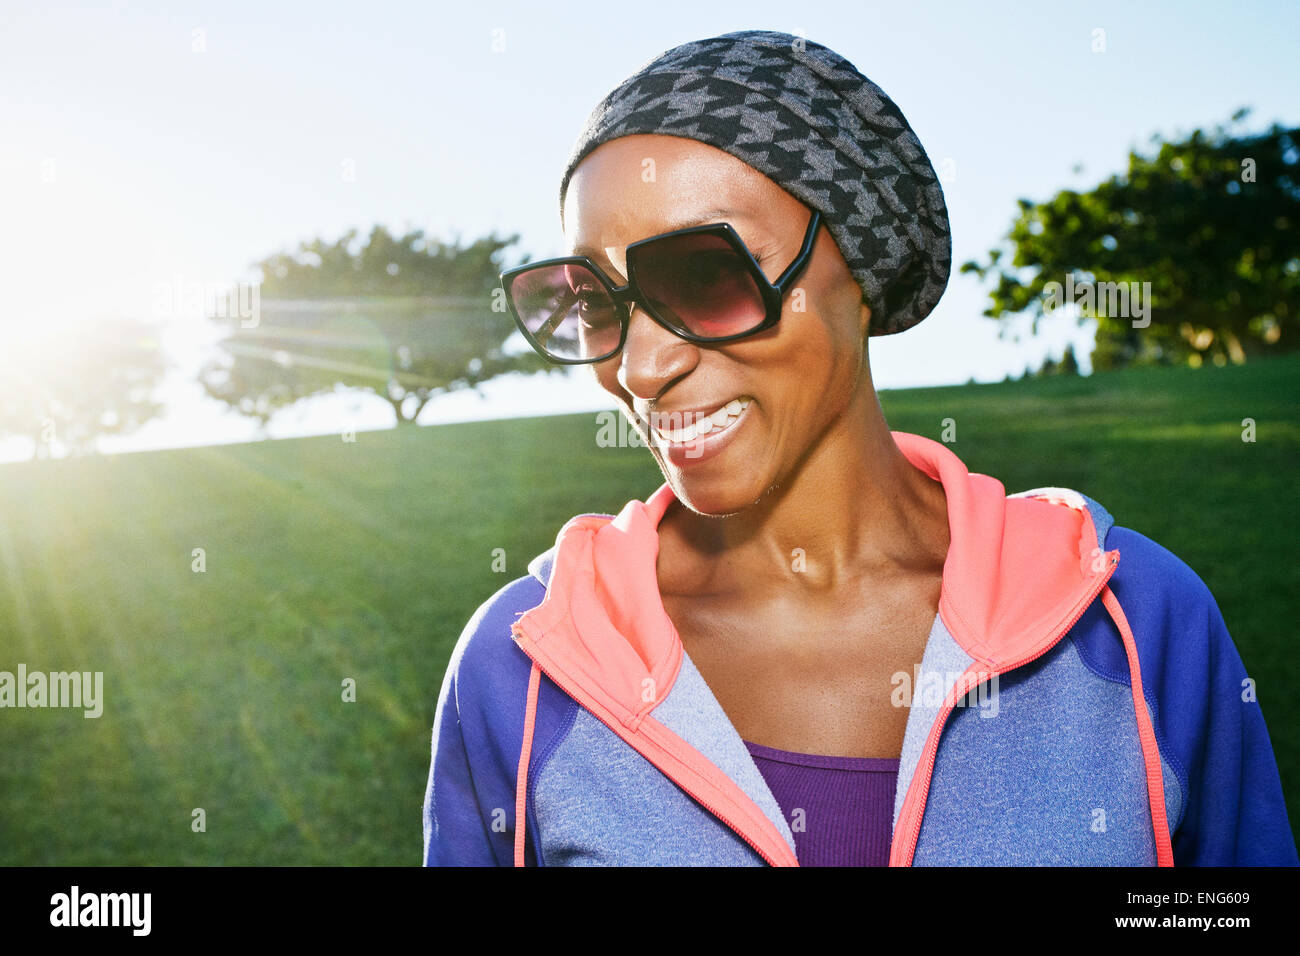 African American Woman wearing sunglasses in park Banque D'Images